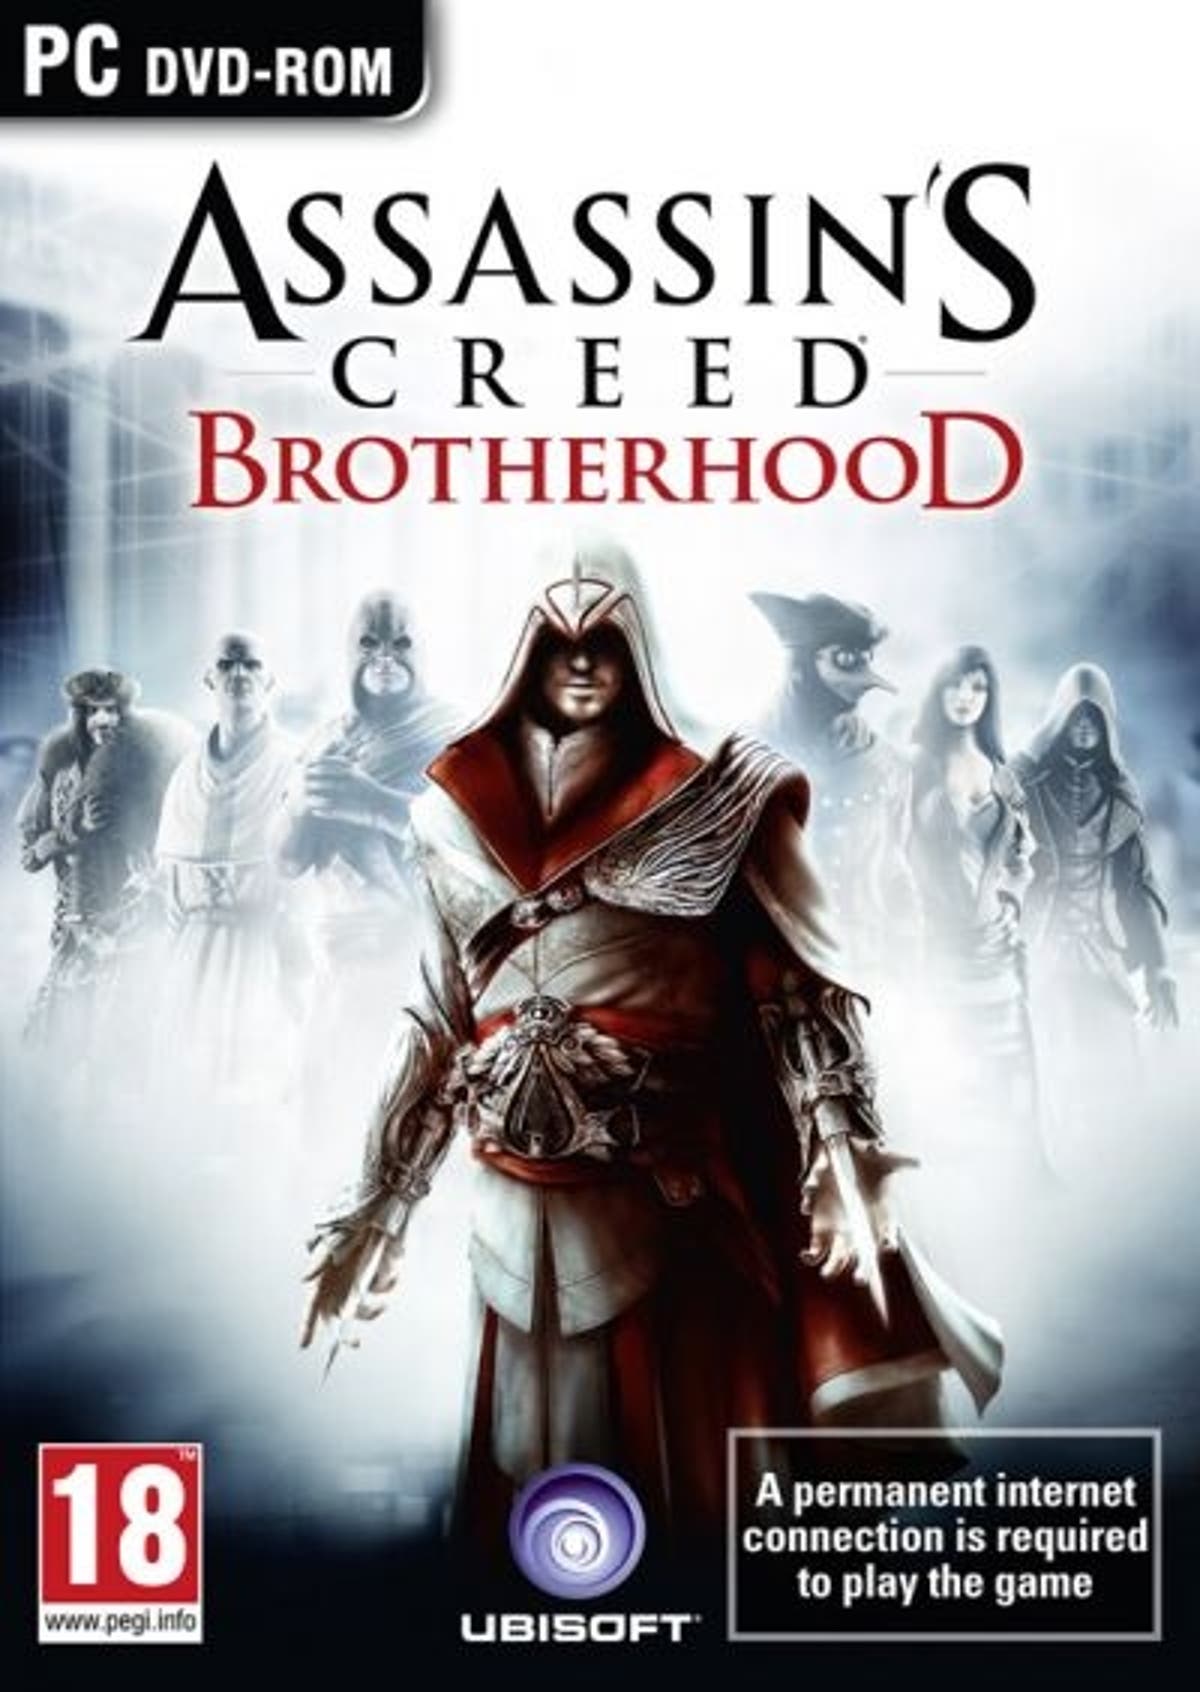 Assassins Creed 1 & 2: Ultimate Collection (PC DVD-ROM) Set